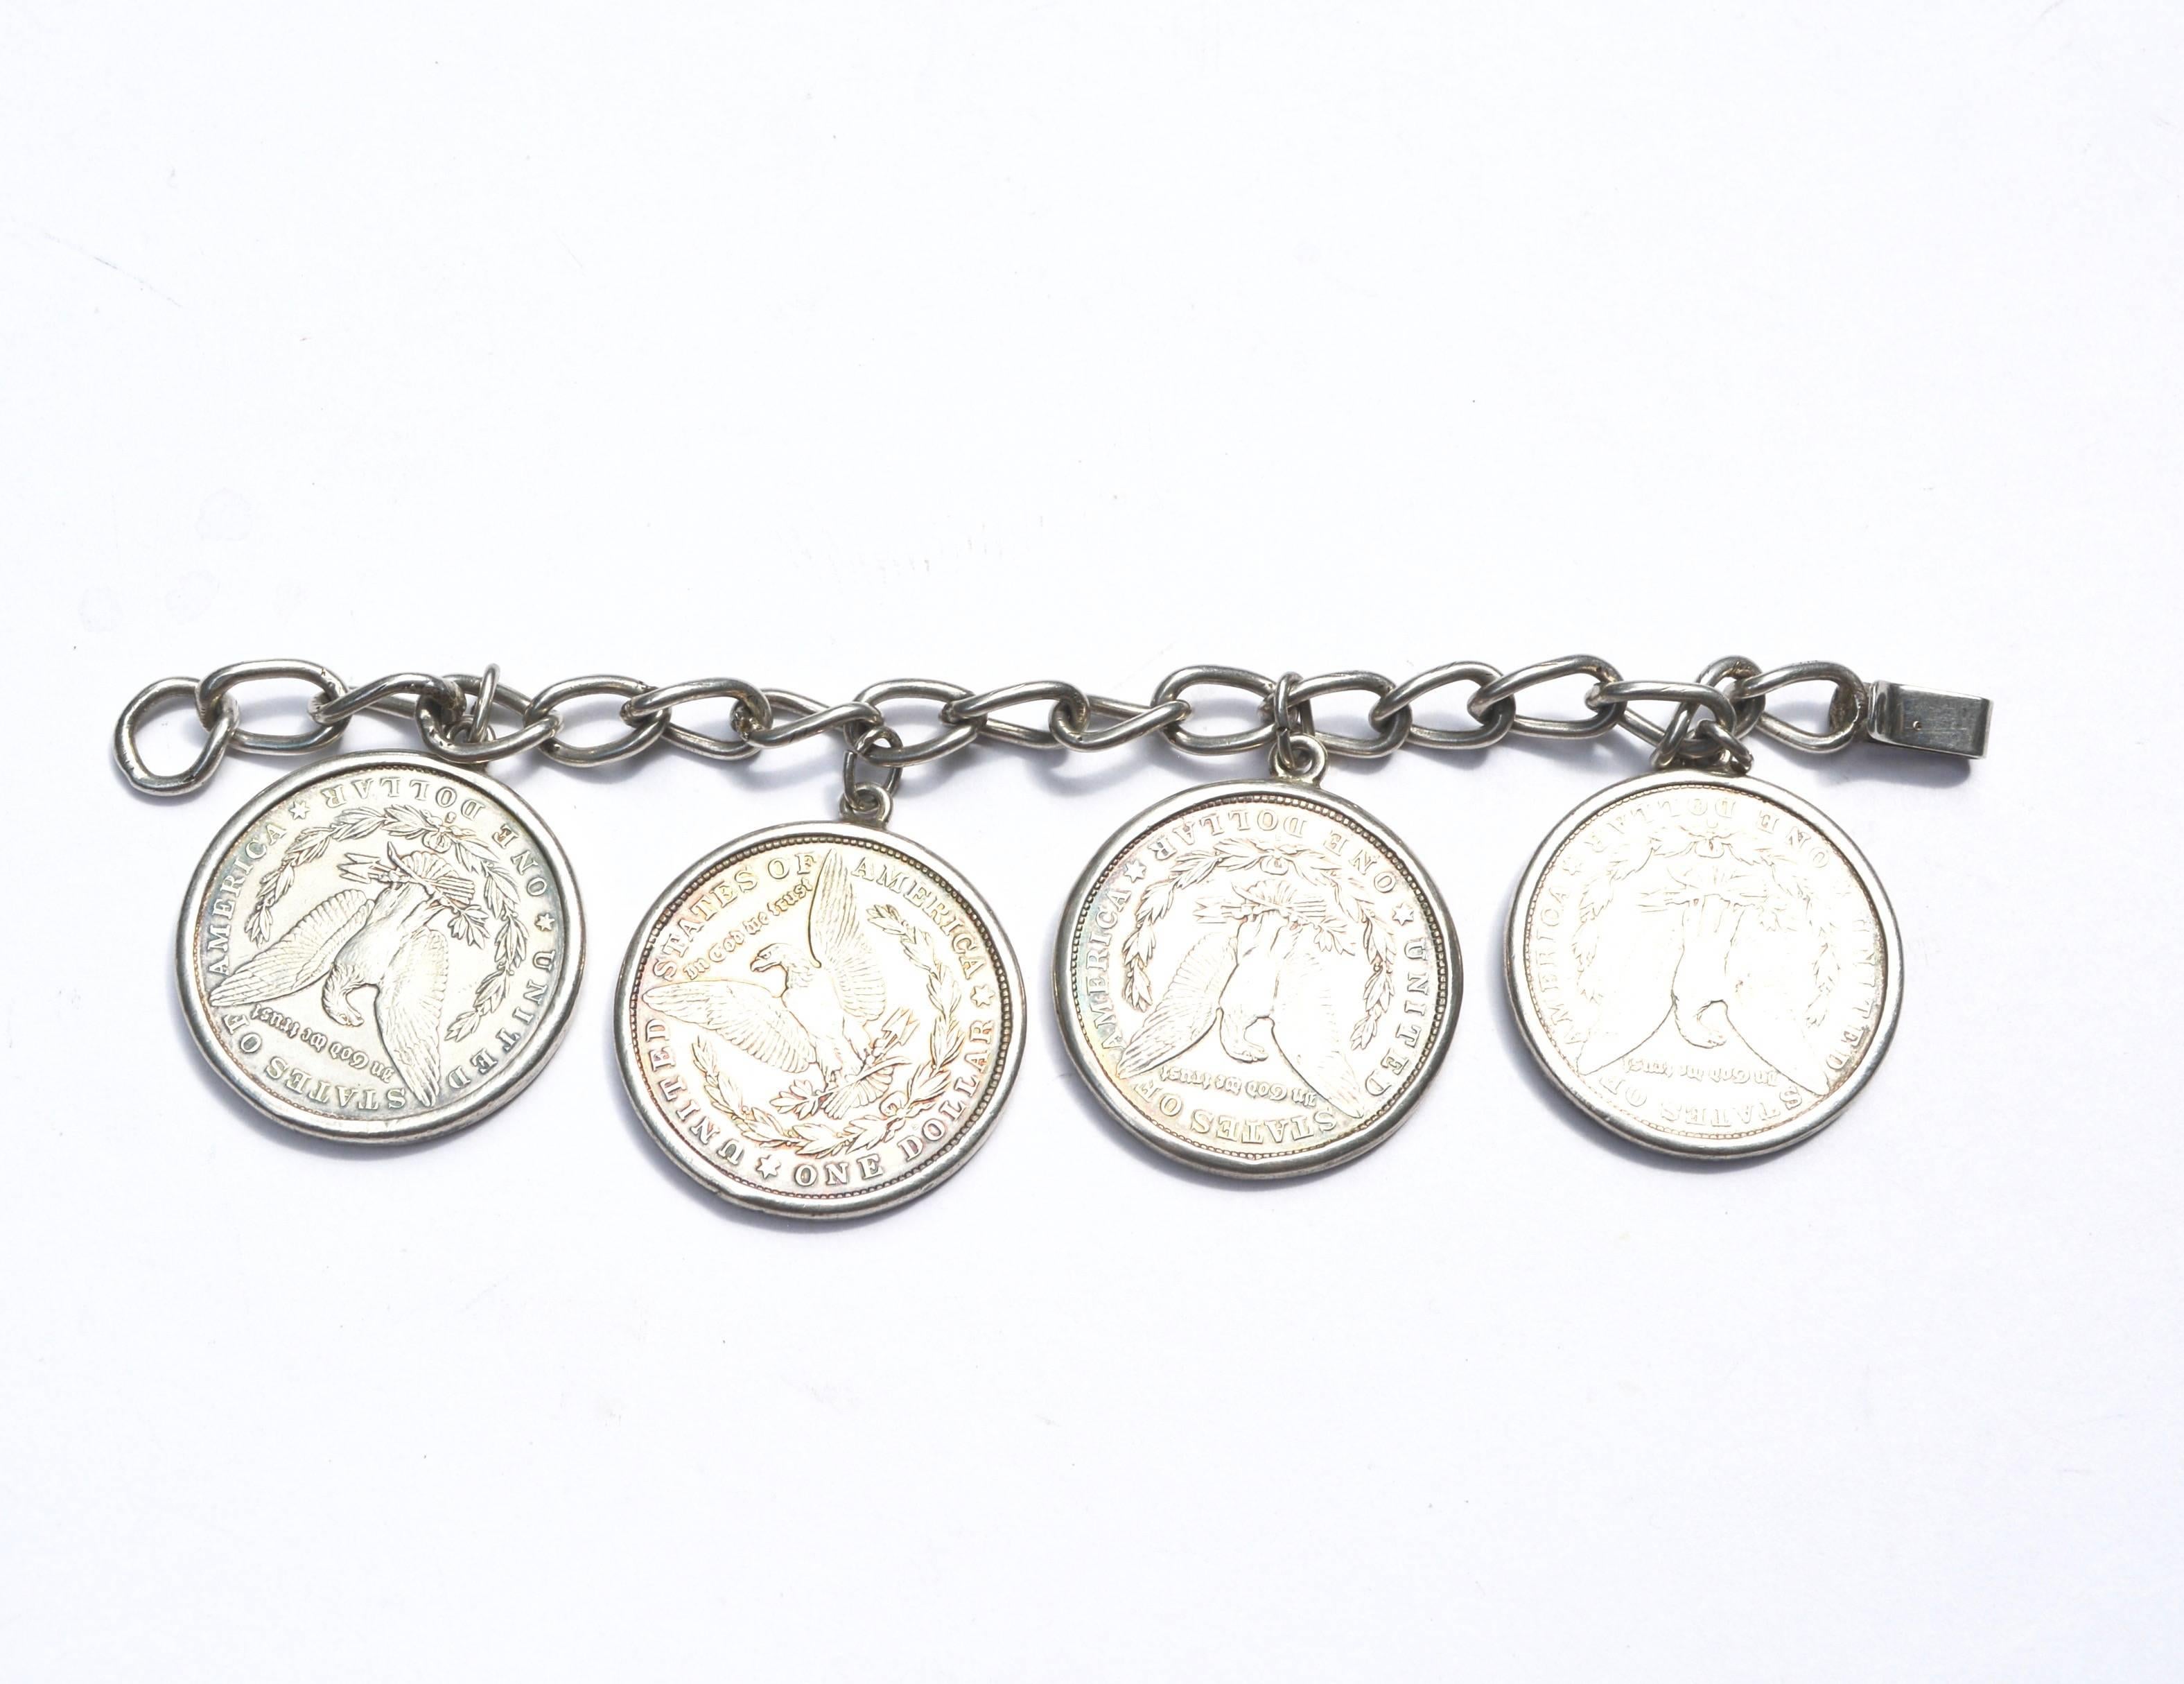 Gorgeous handmade thick silver dollar coin bracelet. Marked sterling. About 137 grams of silver. Reportedly made by a Native American maker in the 60s. 7